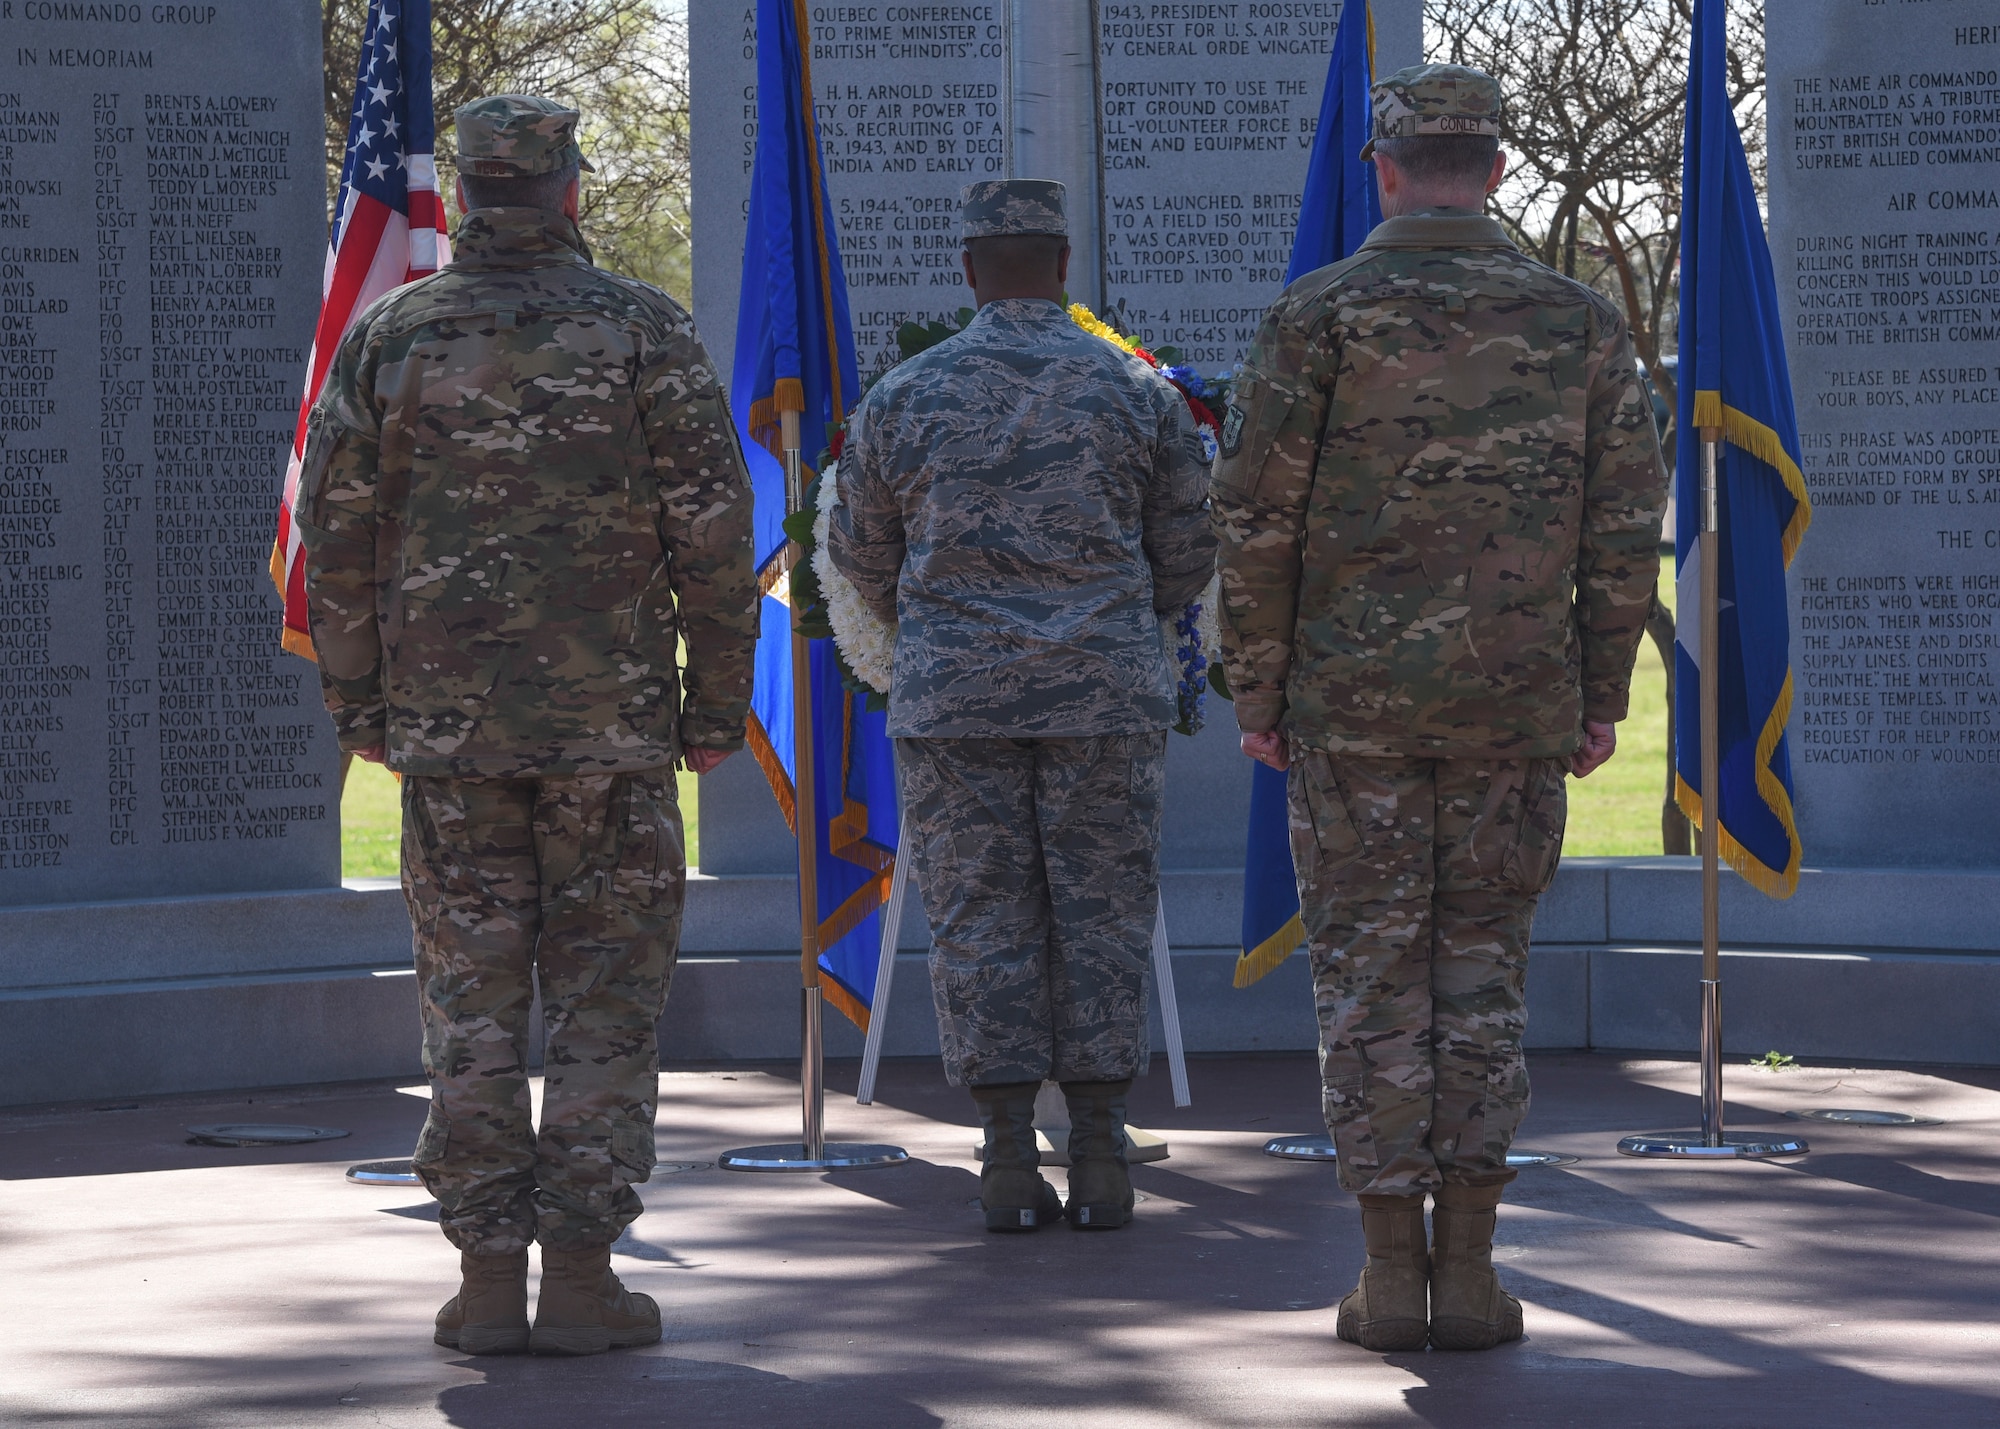 Honor Guard Airman placing a wreath during a ceremony